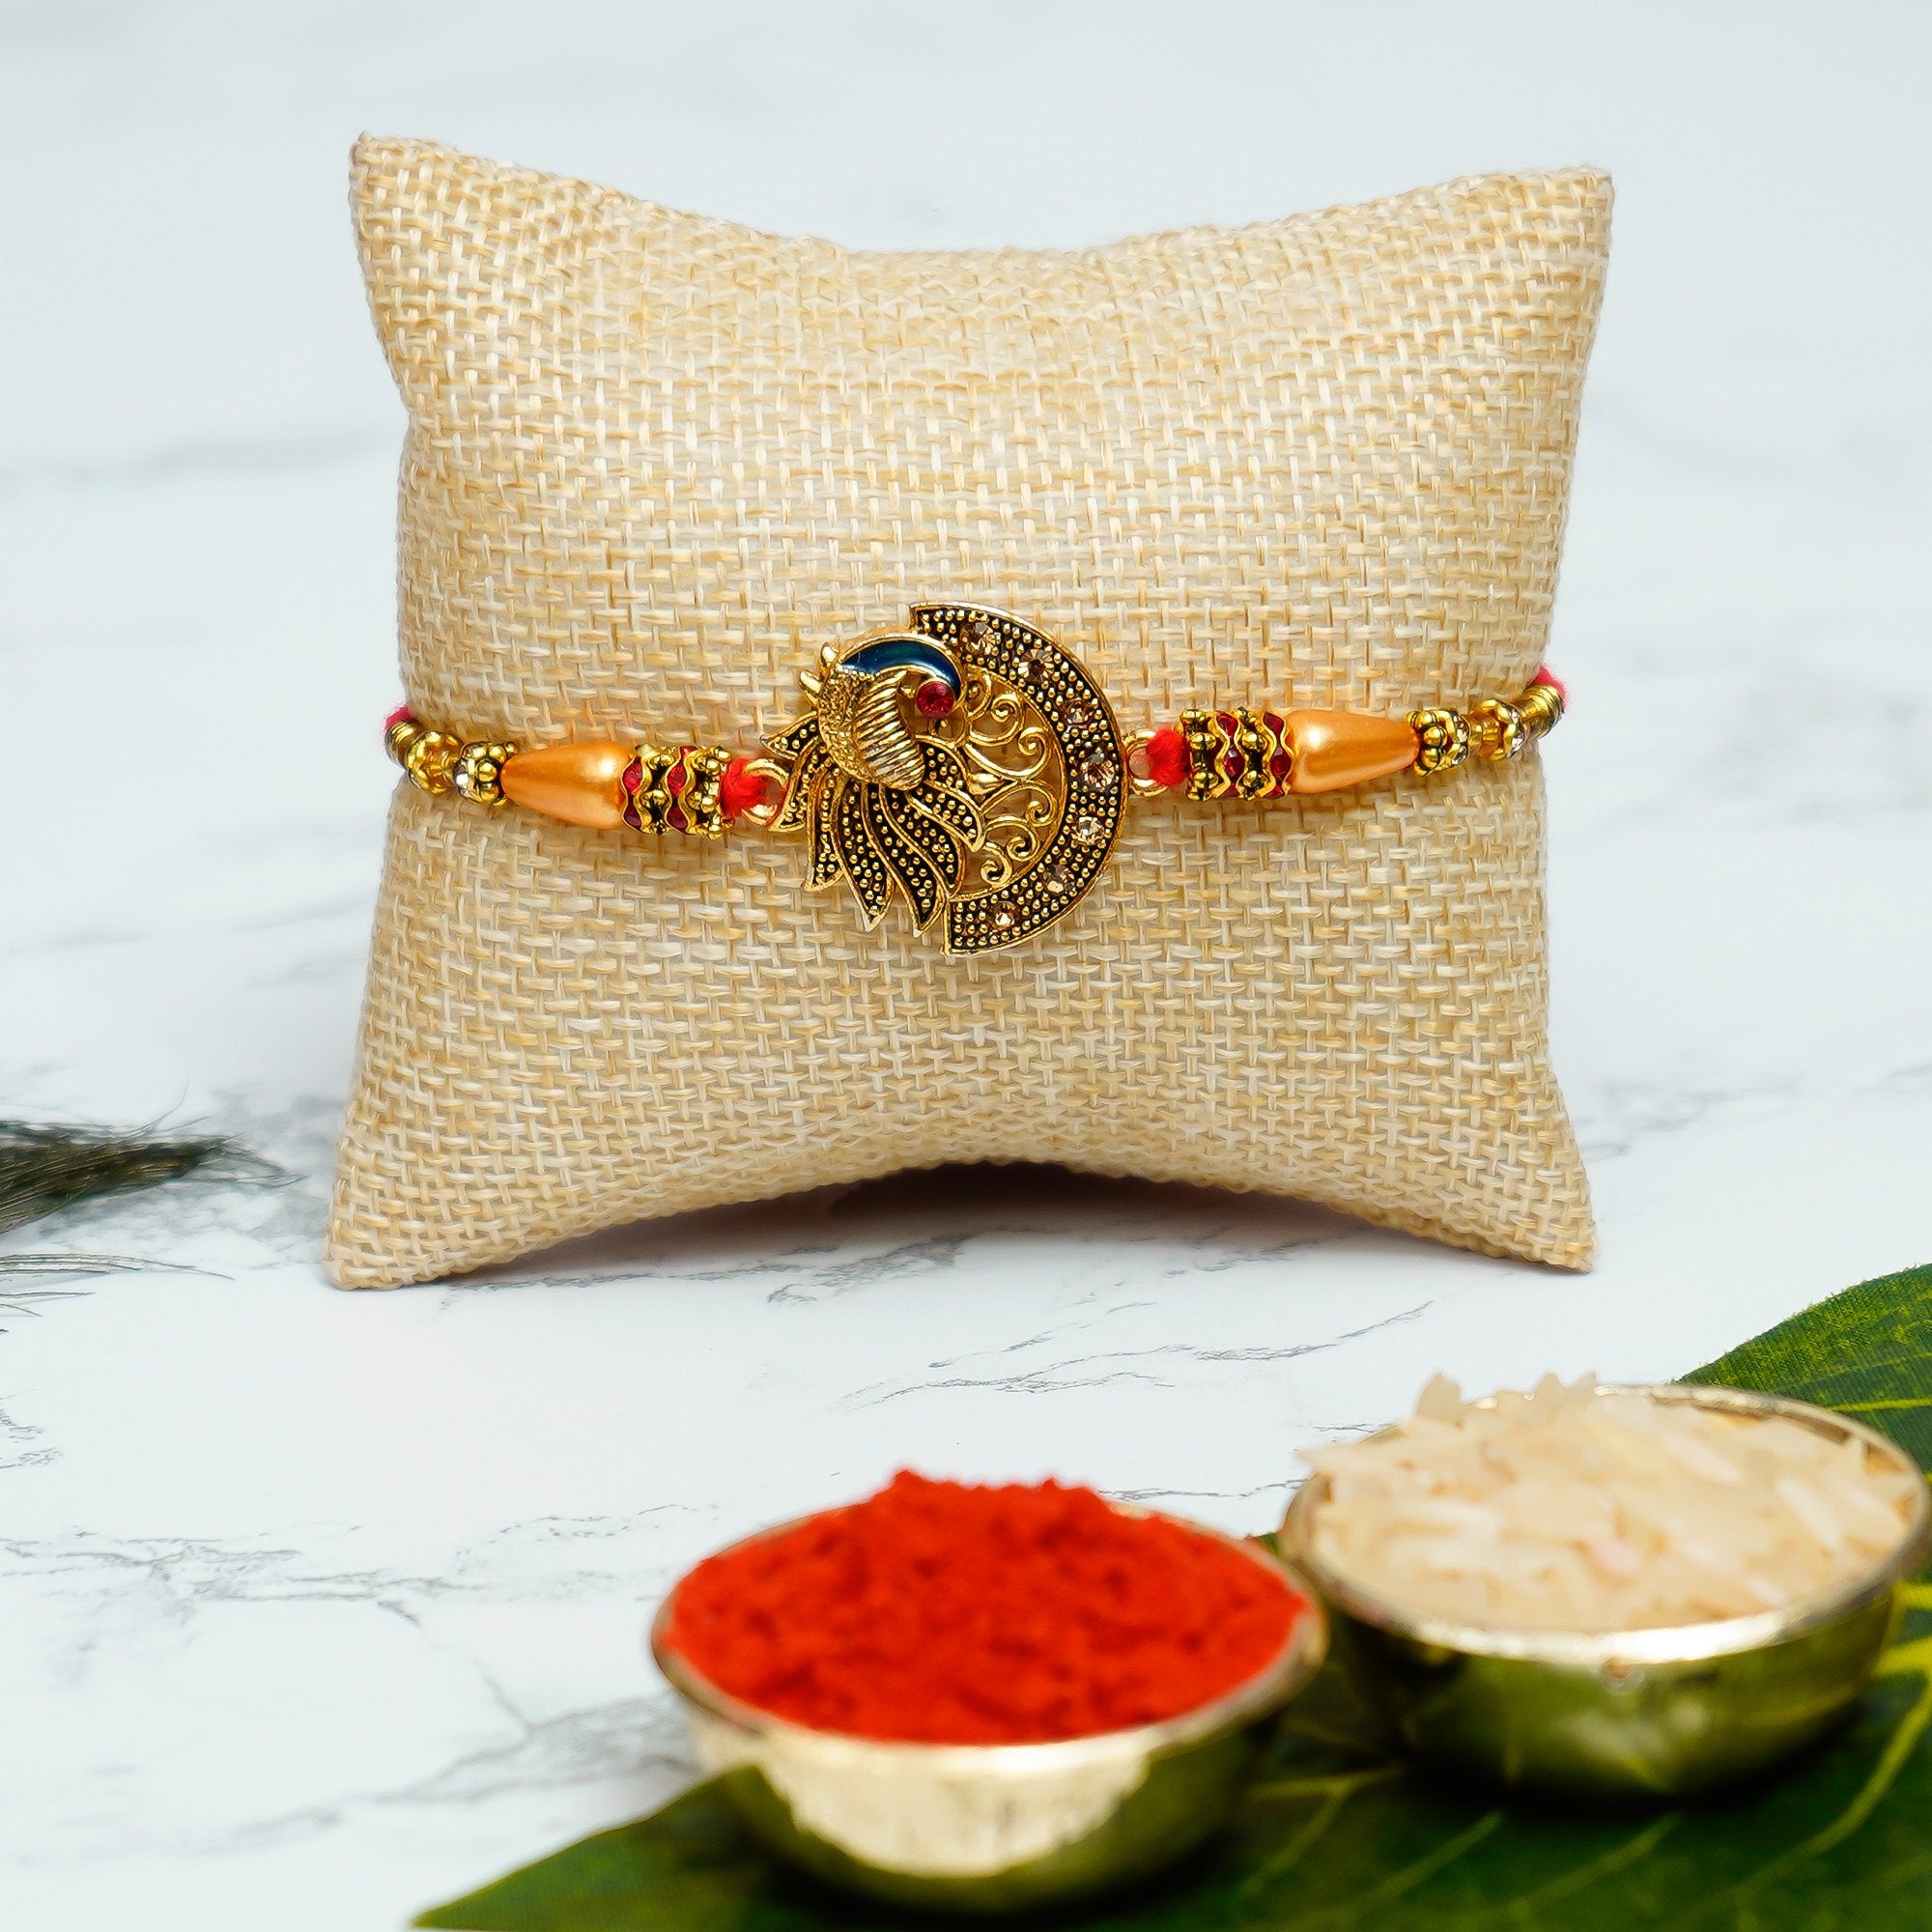 Designer Peacock Rakhi with Brass Buddha Resting Antique Artifact and Roli Chawal Pack, Best Wishes Greeting Card 1